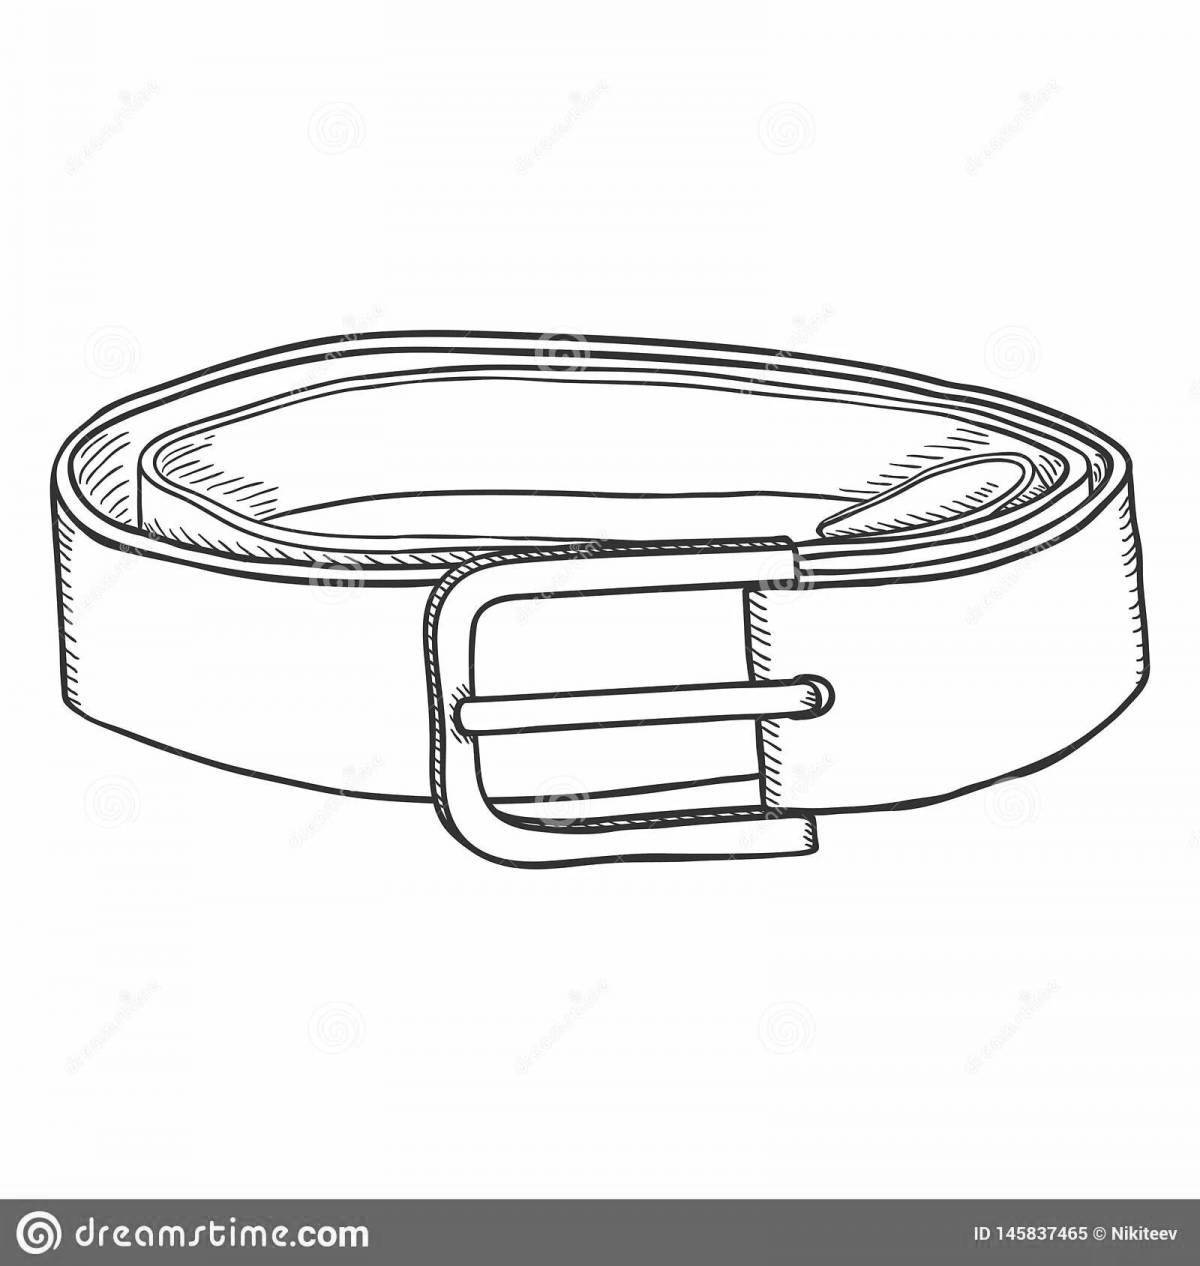 Coloring page glamorous baby belt